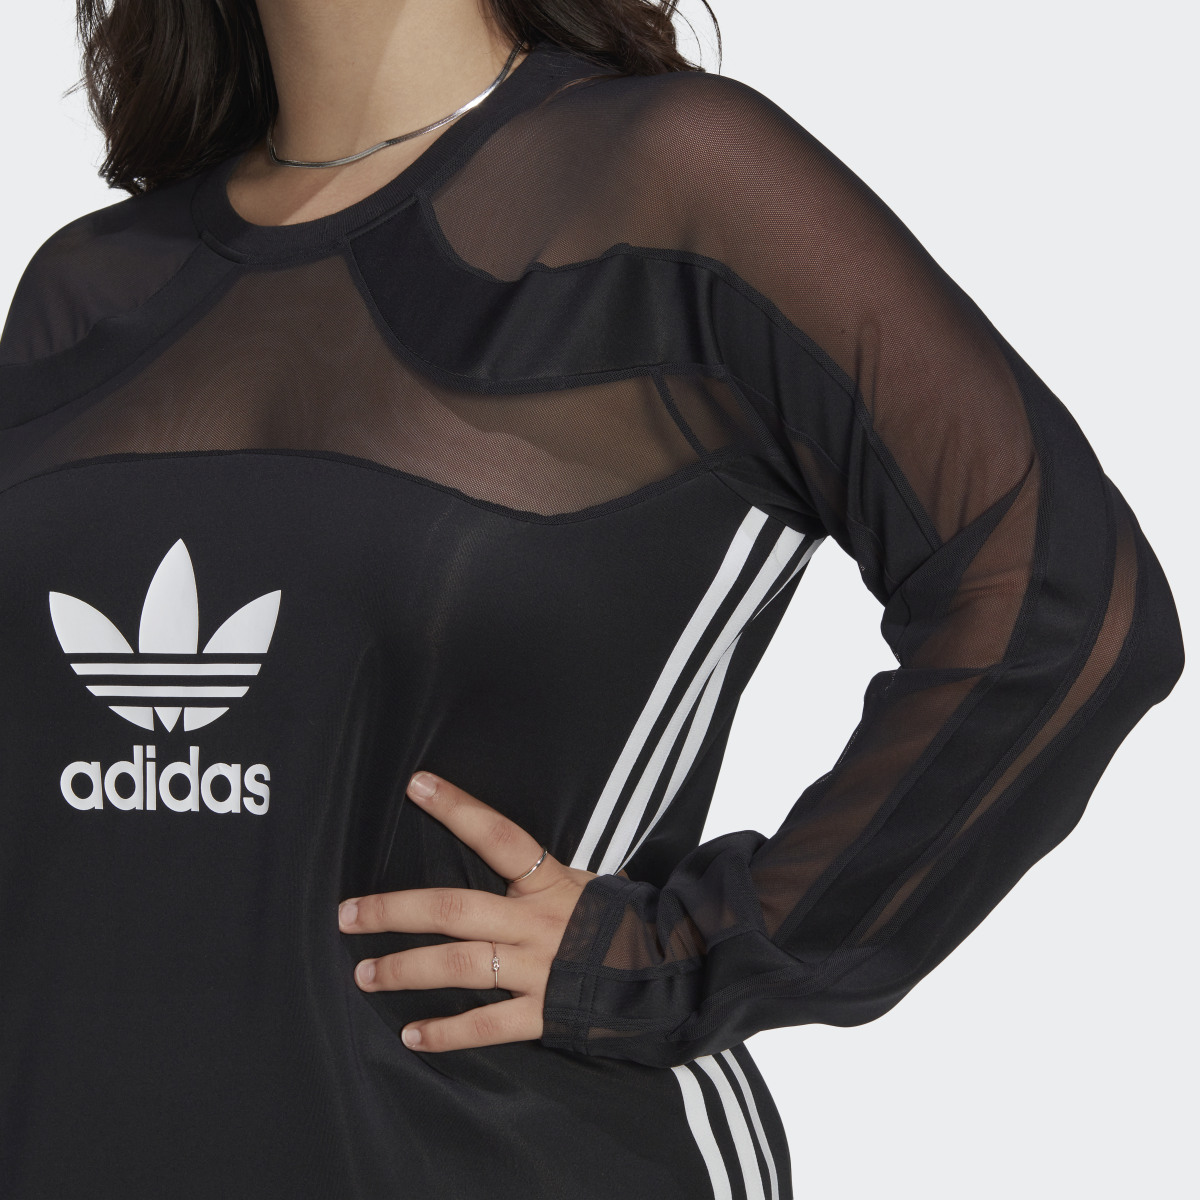 Adidas Centre Stage Mesh Top (Plus Size). 6